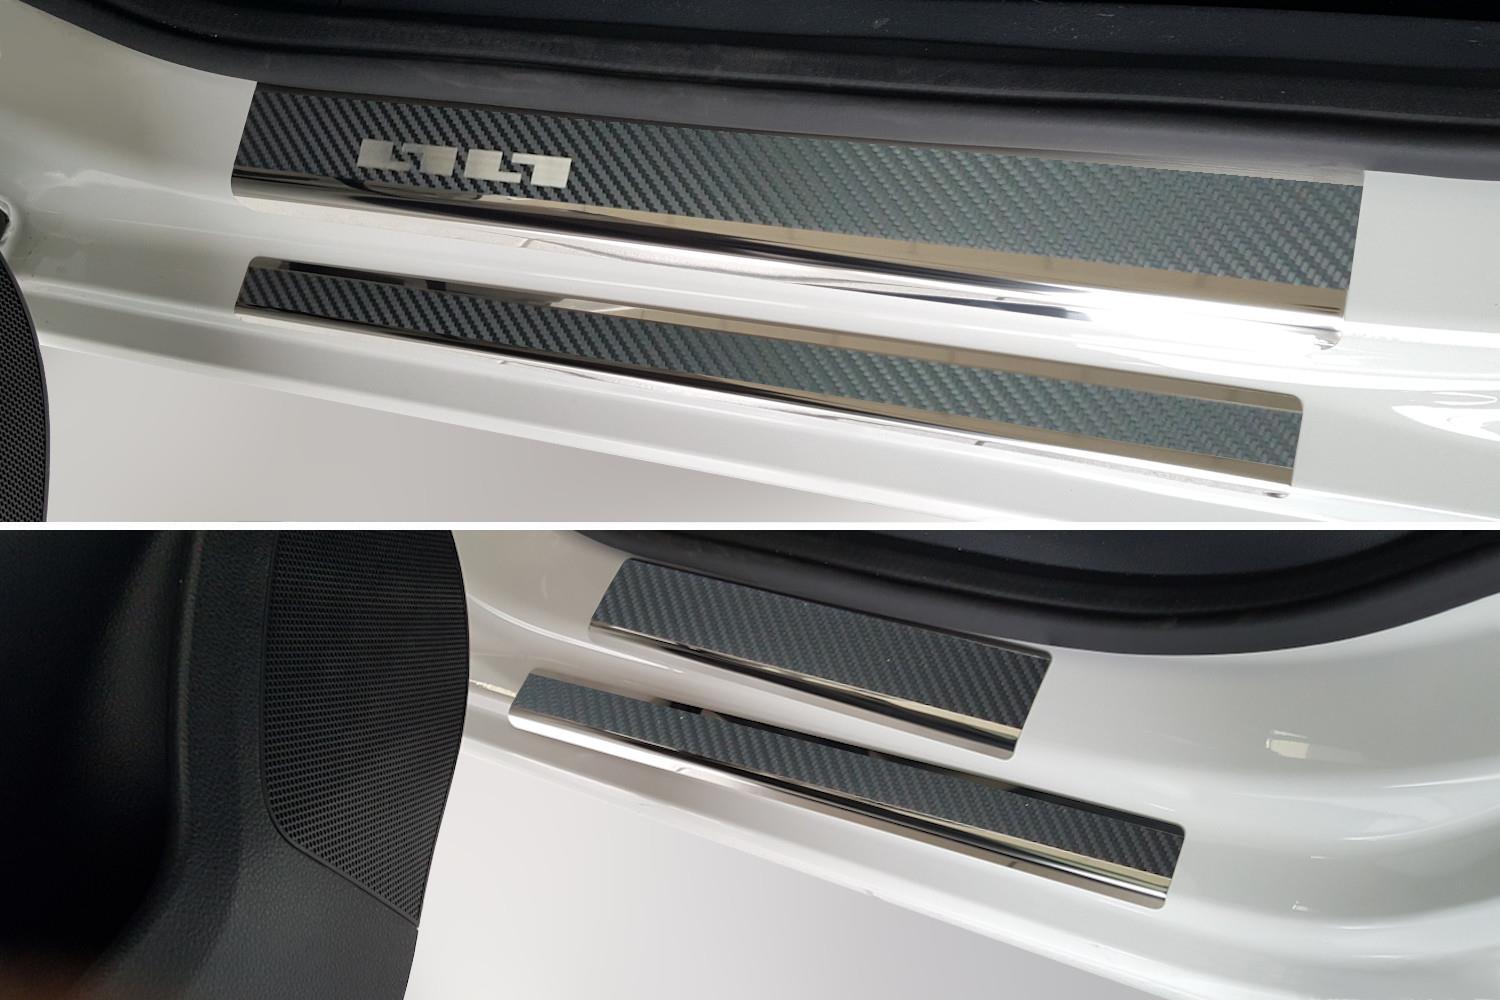 https://www.carparts-expert.com/images/stories/virtuemart/product/ea-example-door-sill-plate-stainless-steel-carbon-foil-8-pcs.jpg